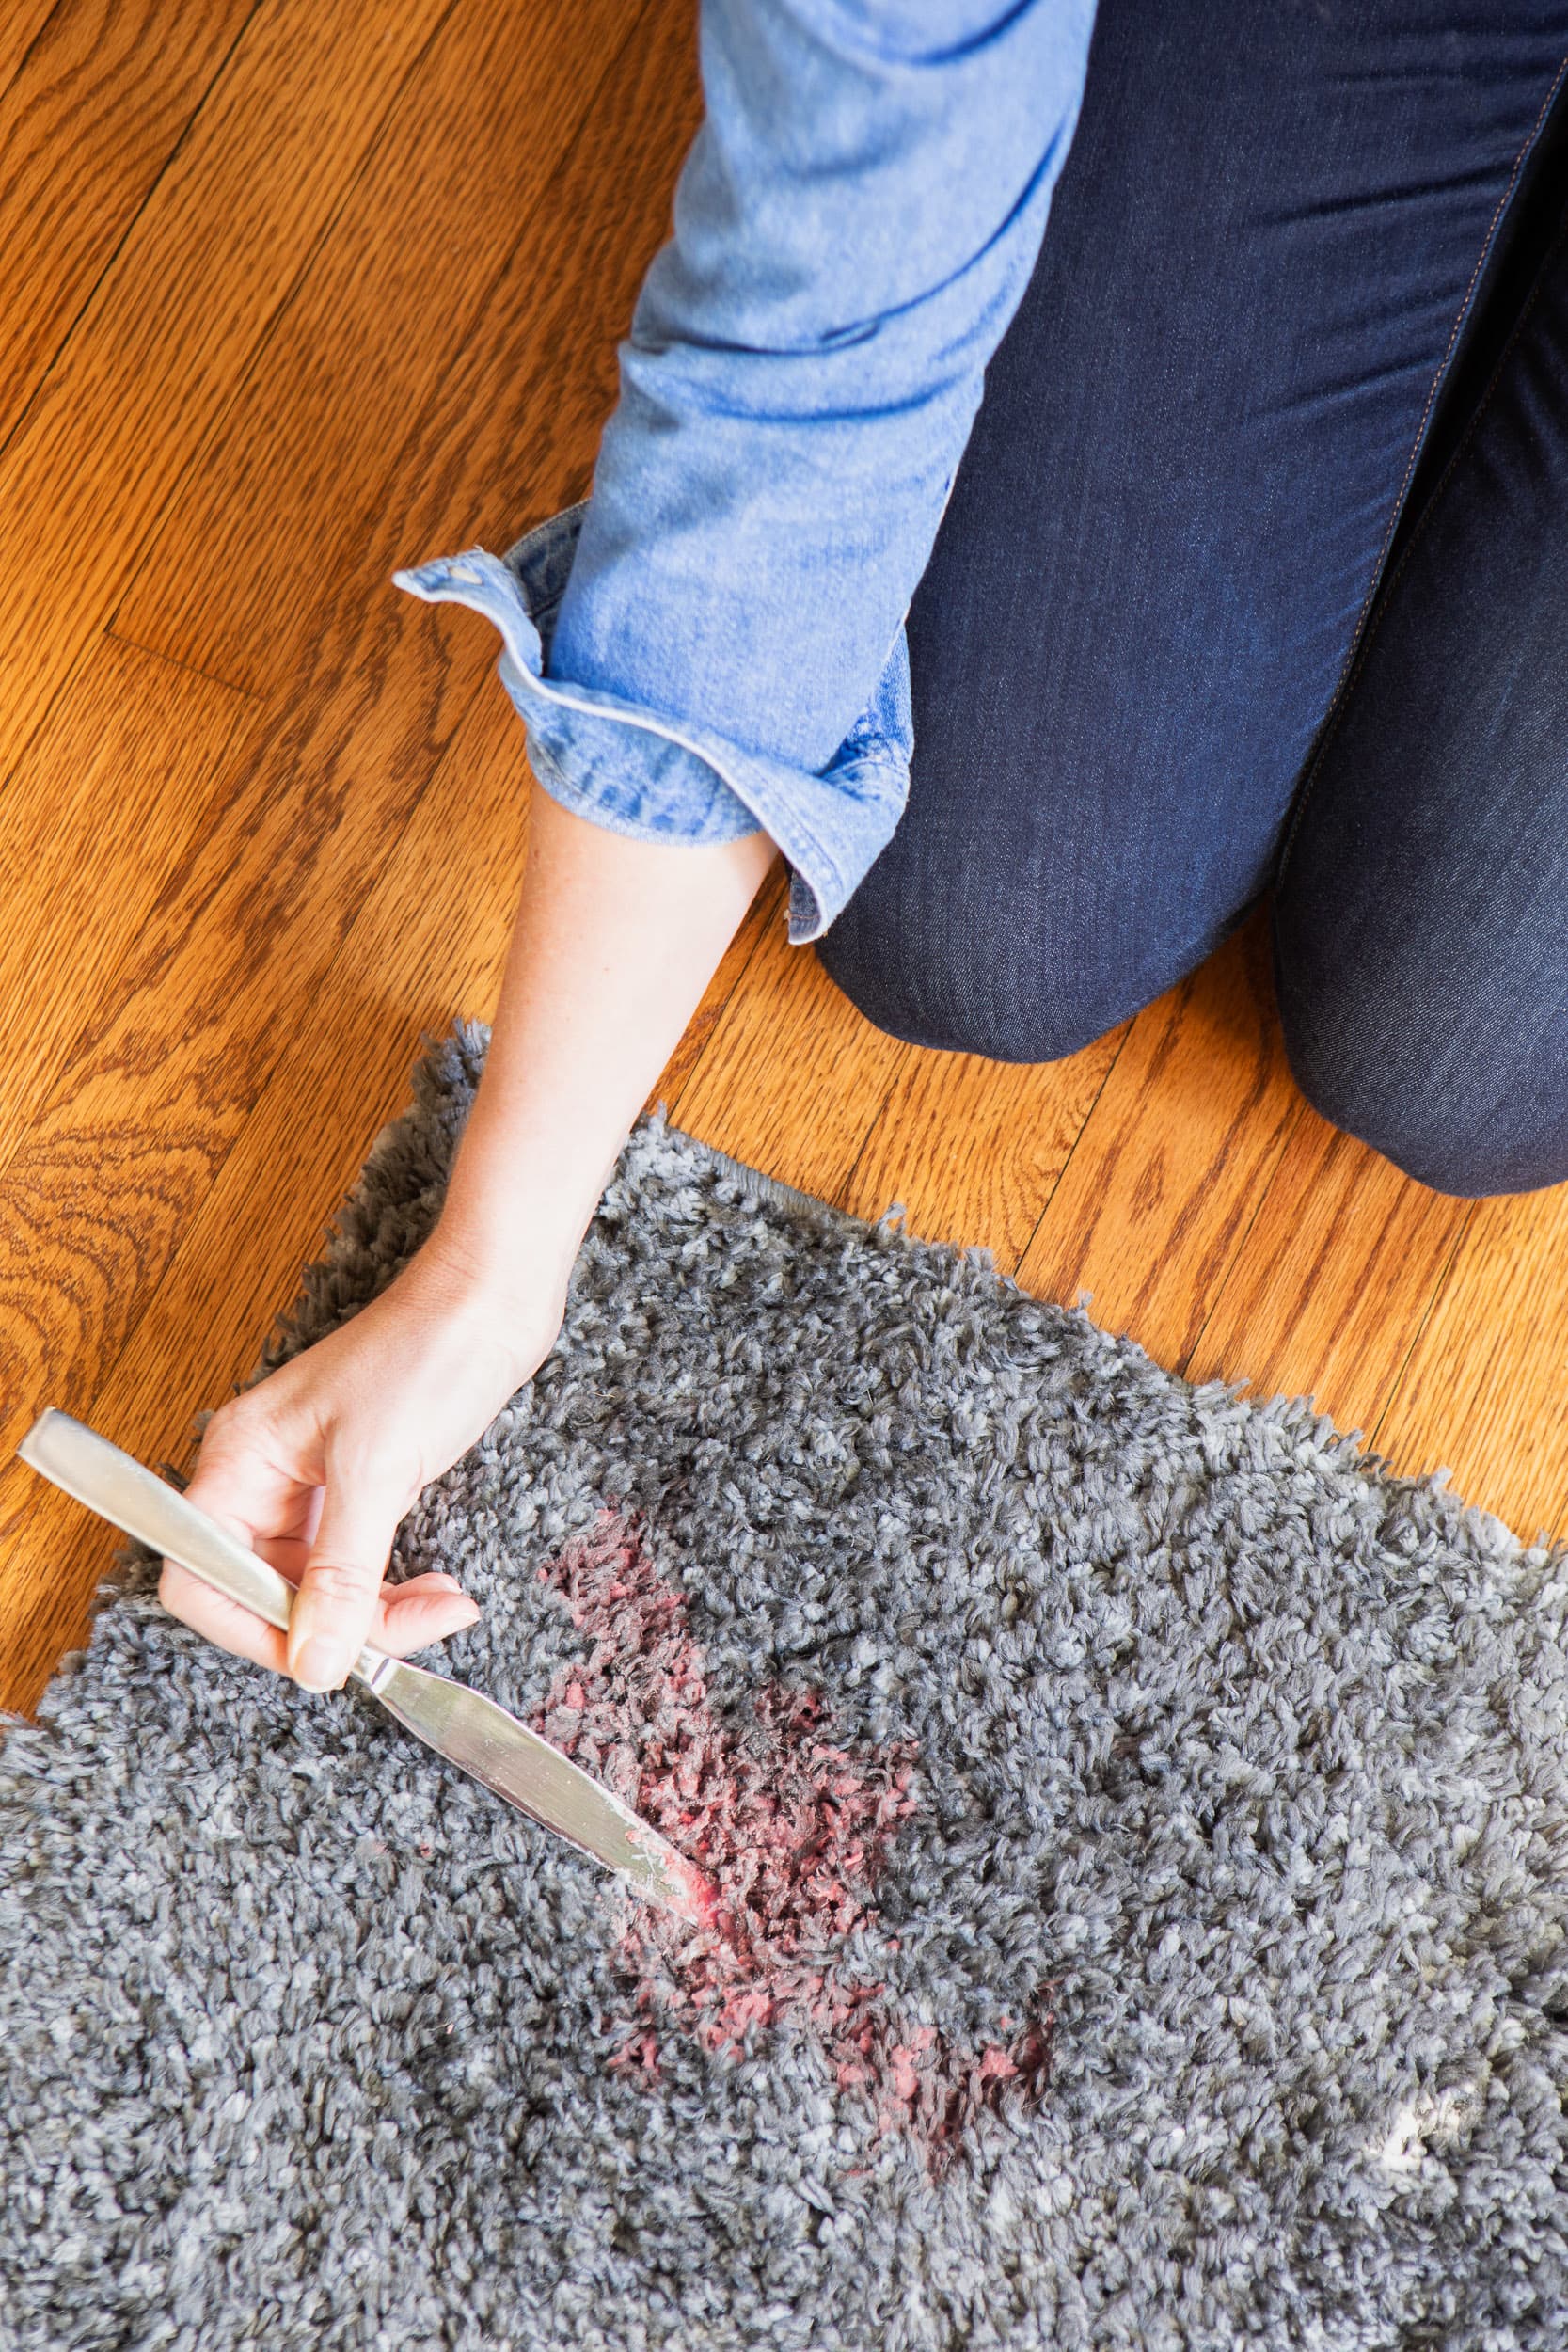 Best' way to remove candle wax from five materials in the home - including  carpet